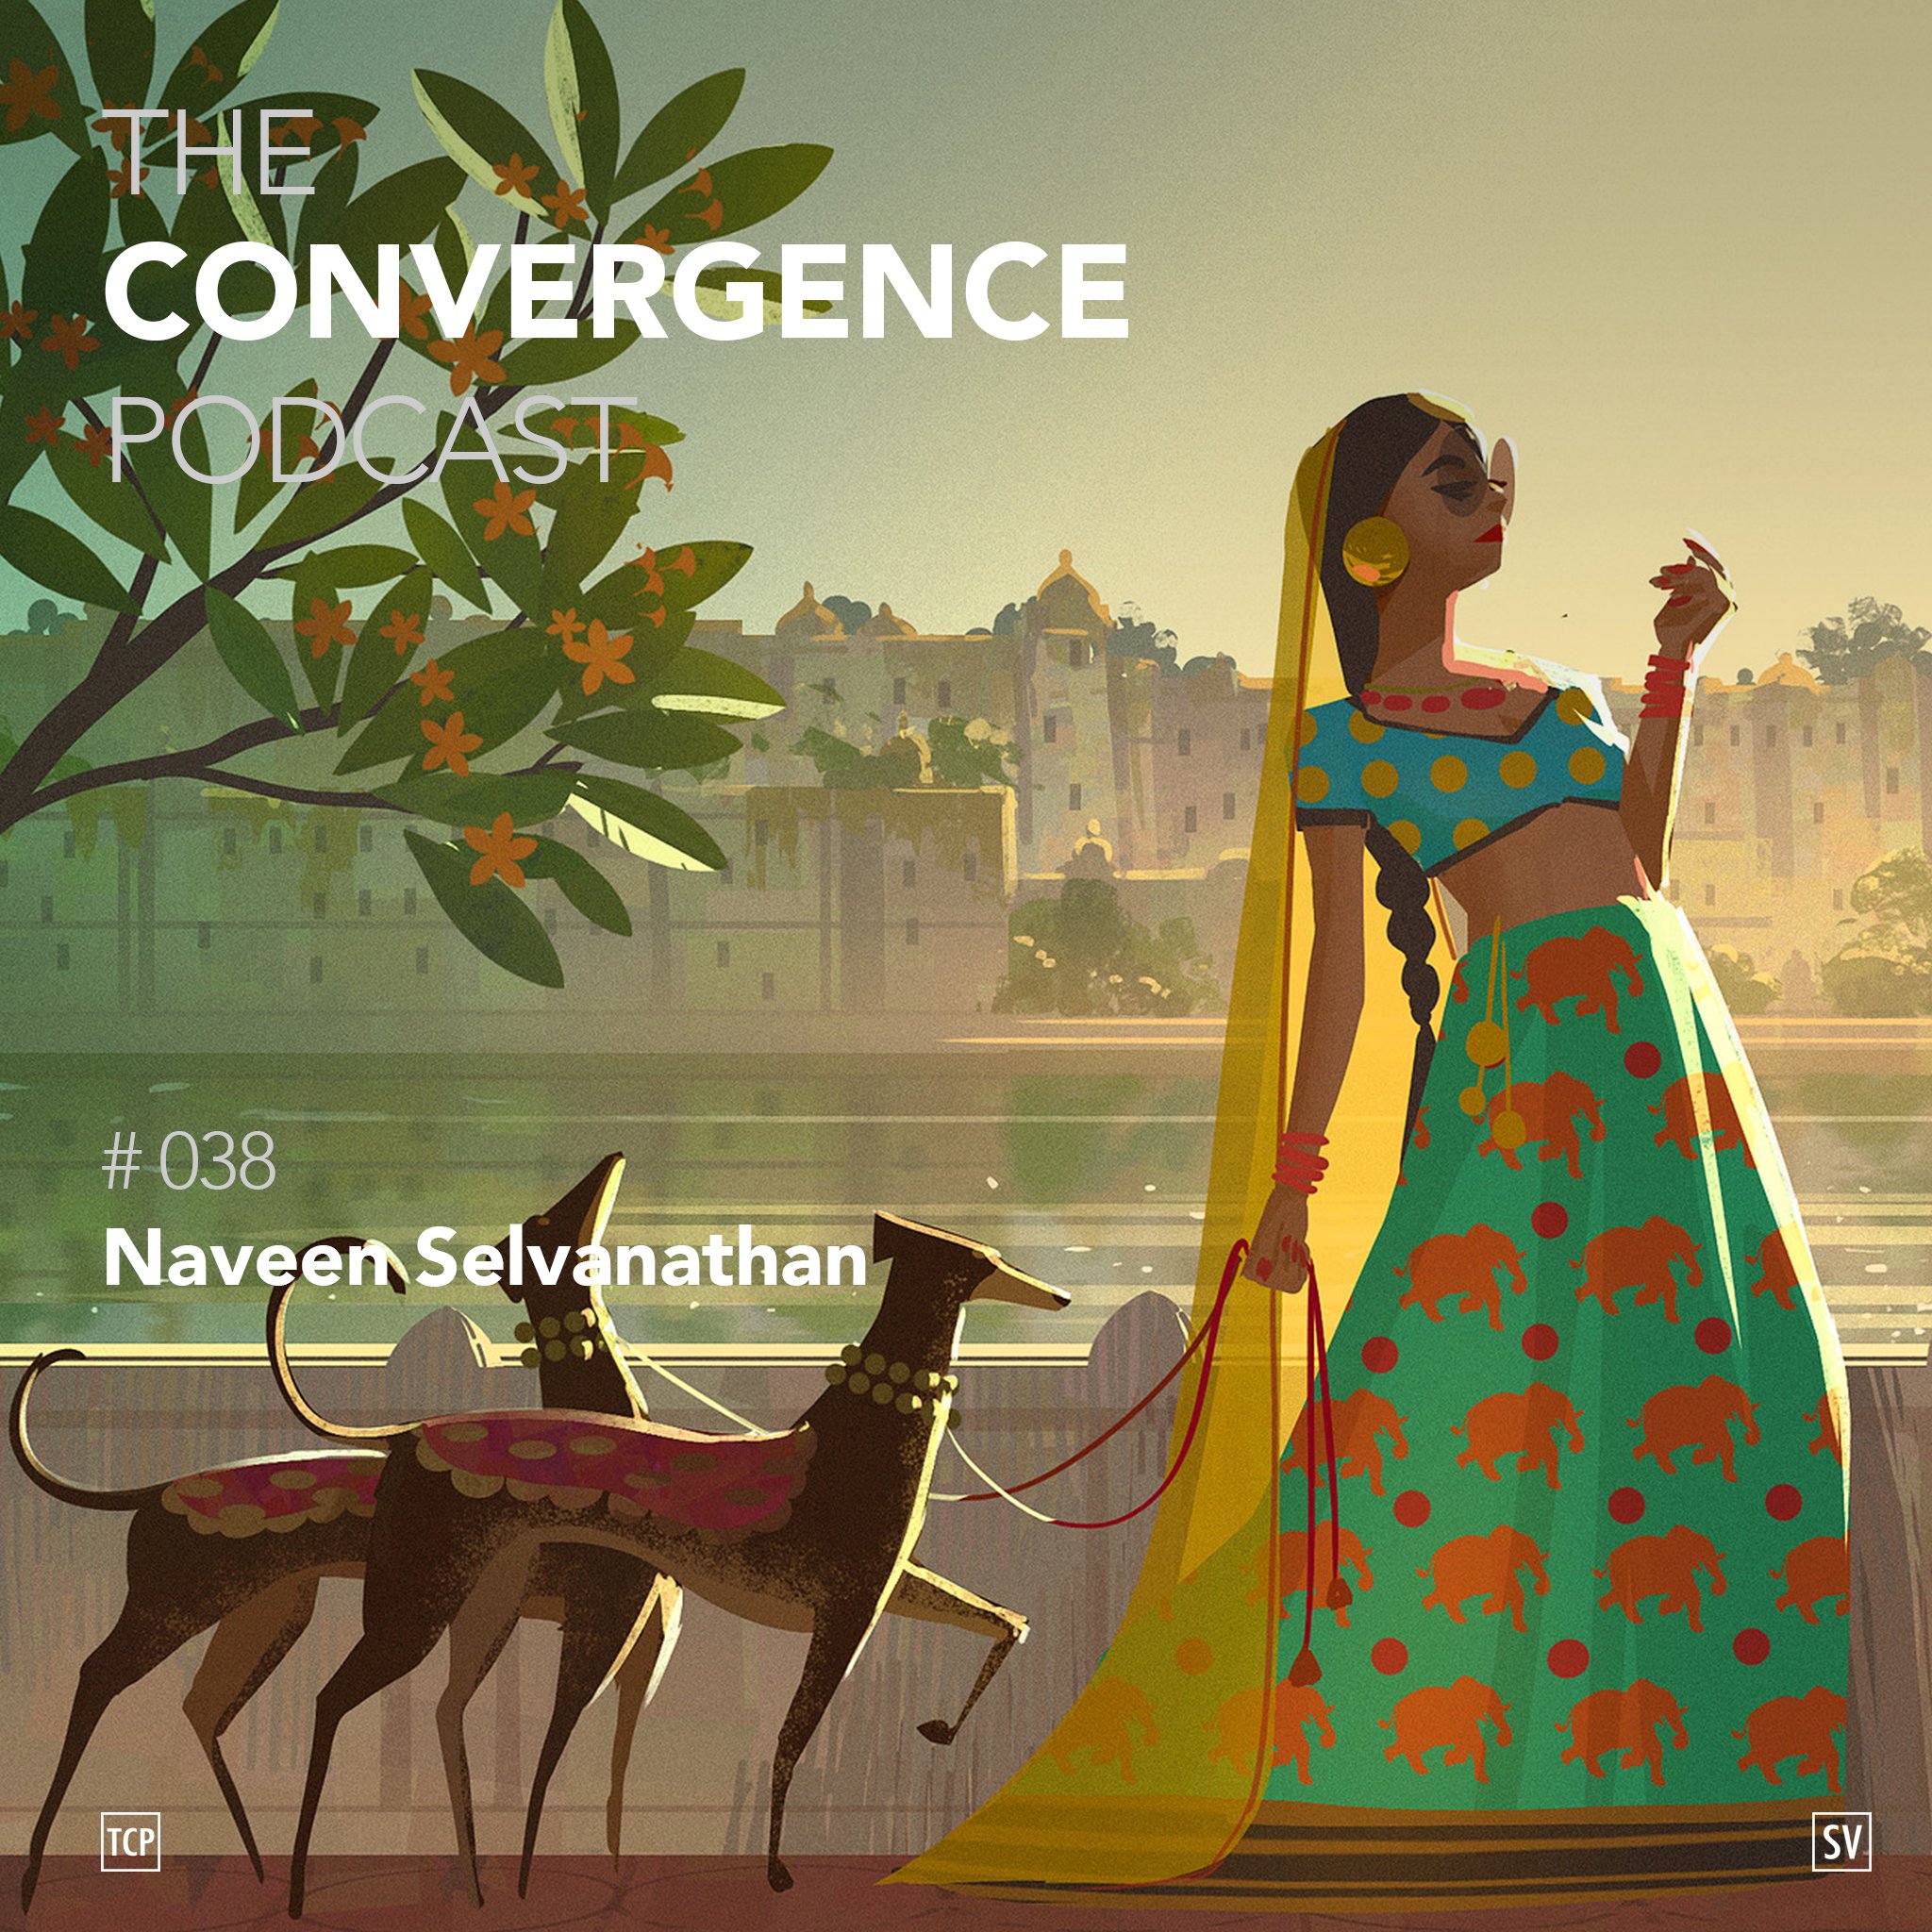 TheConvergencePodcast#038_Naveen Selvanathan.jpg